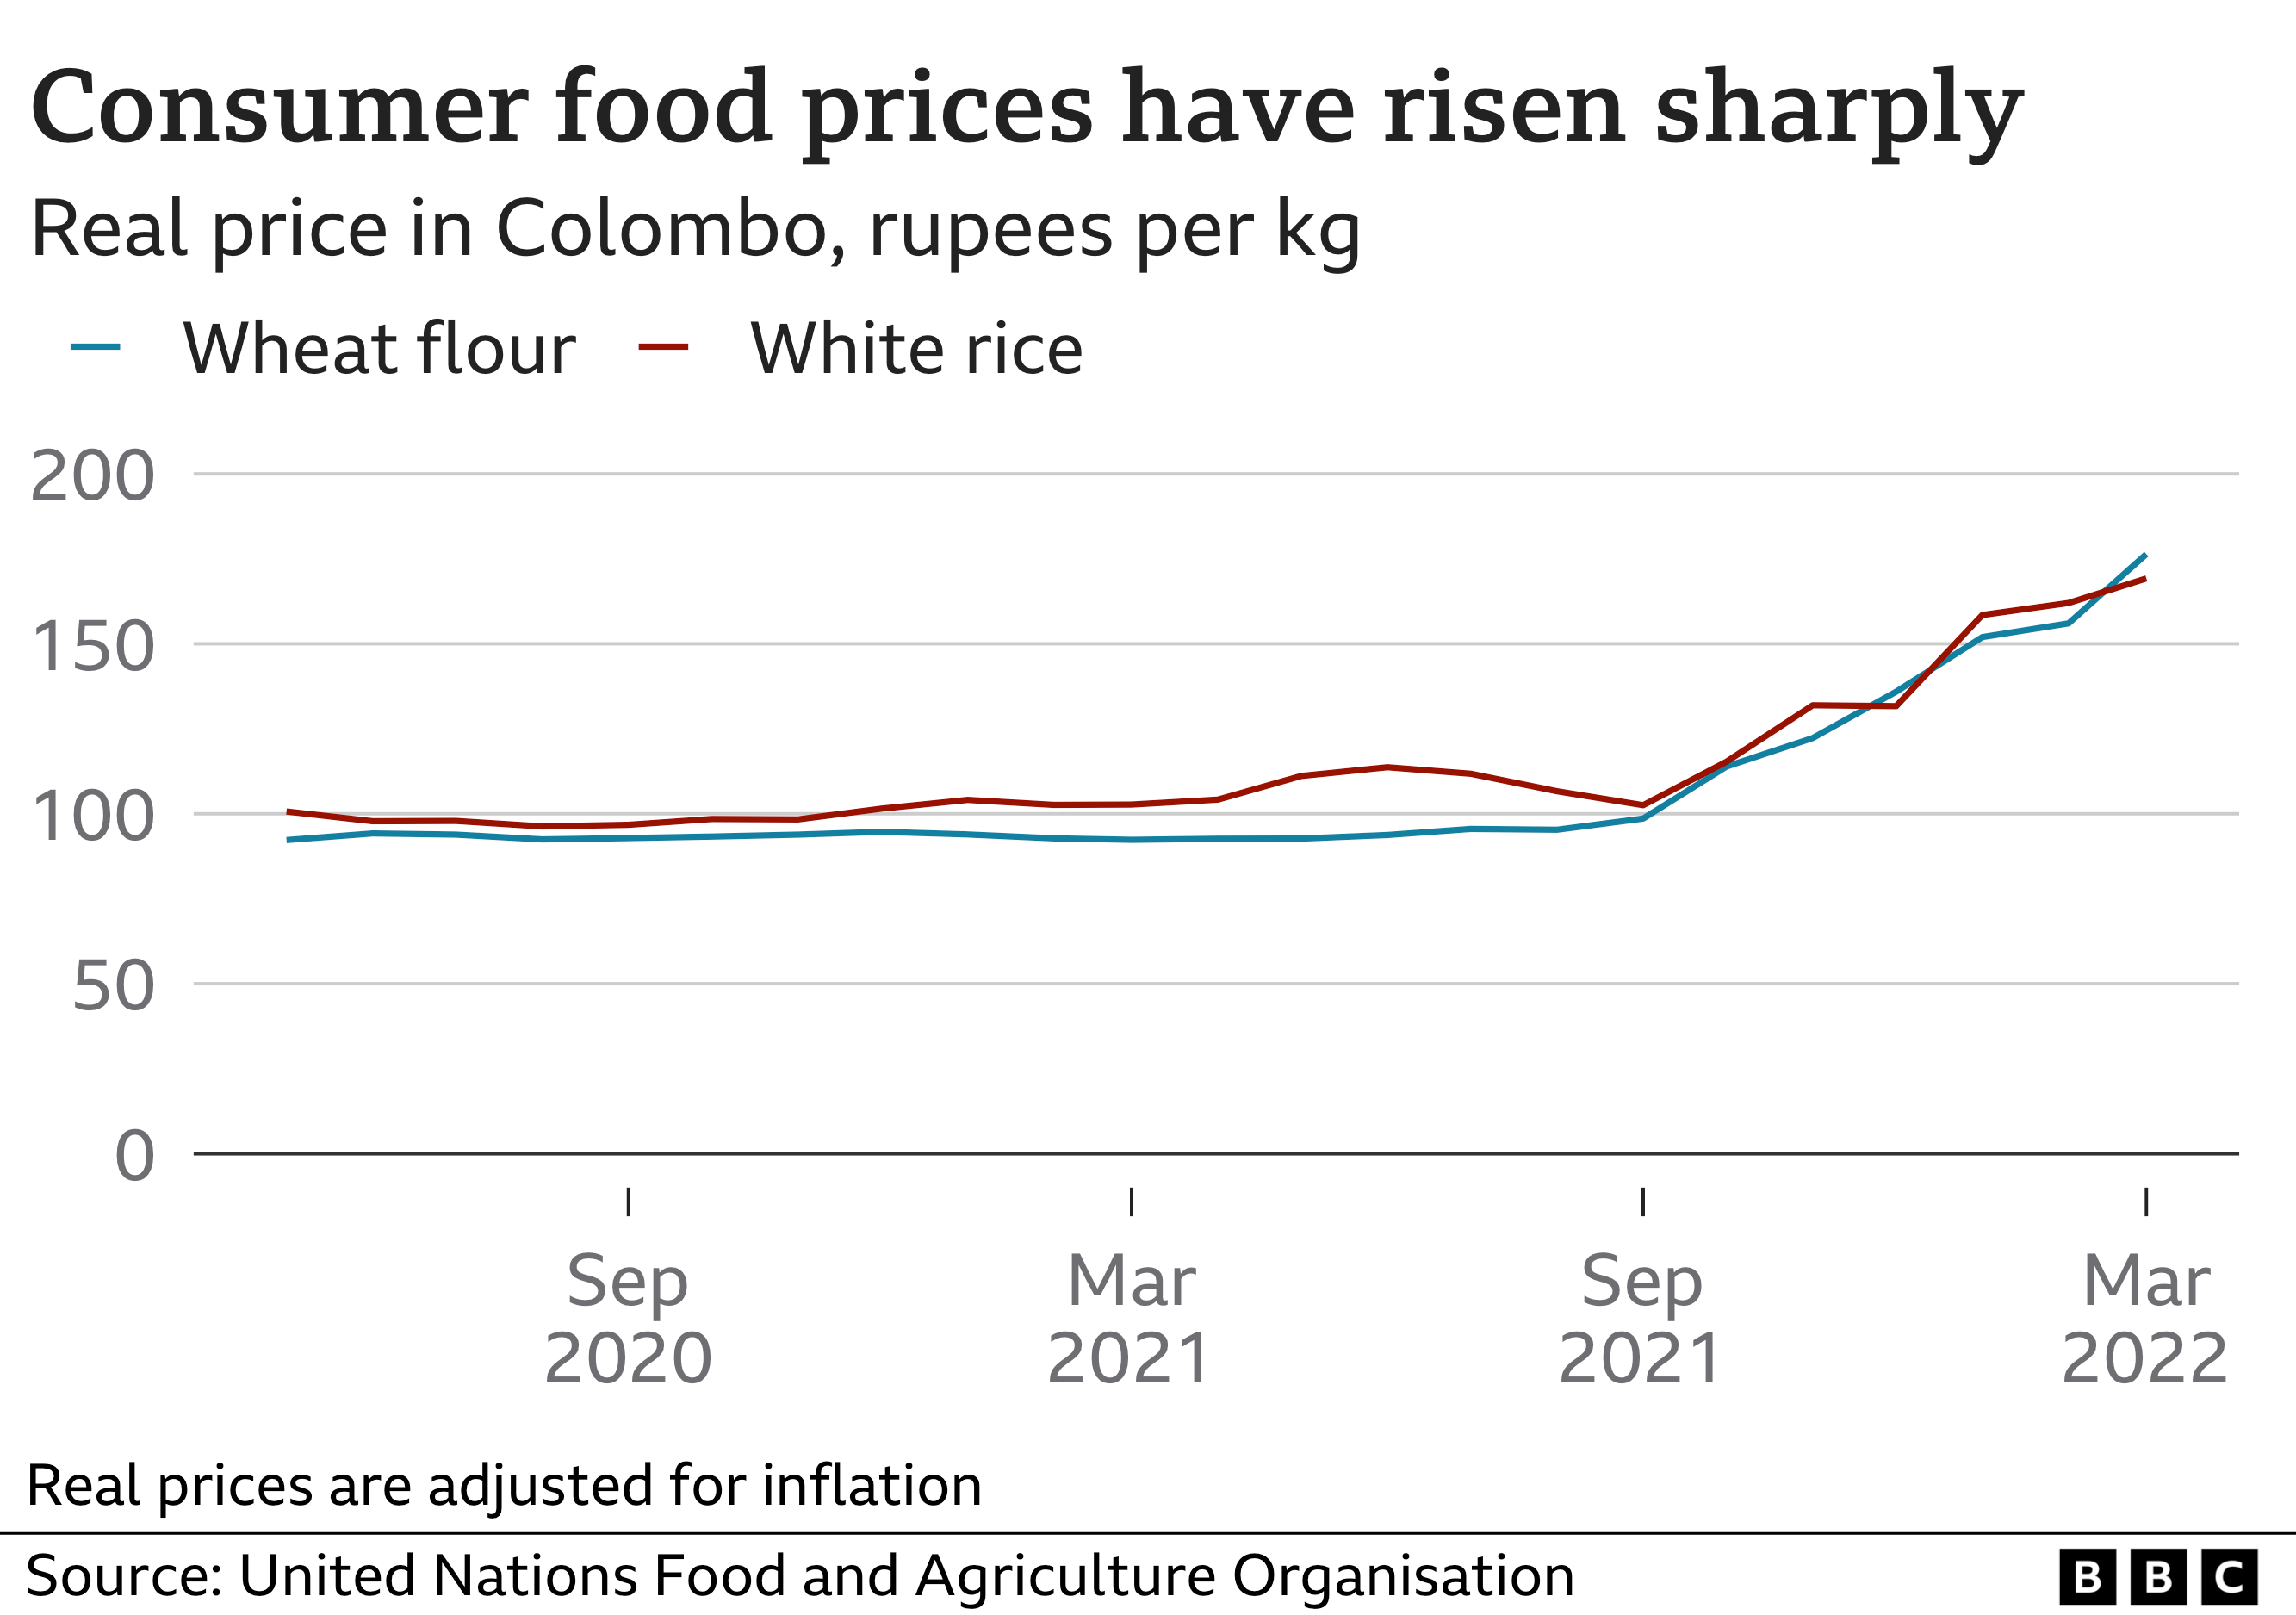 Line chart showing rising prices of wheat flour and white rice in Colombo